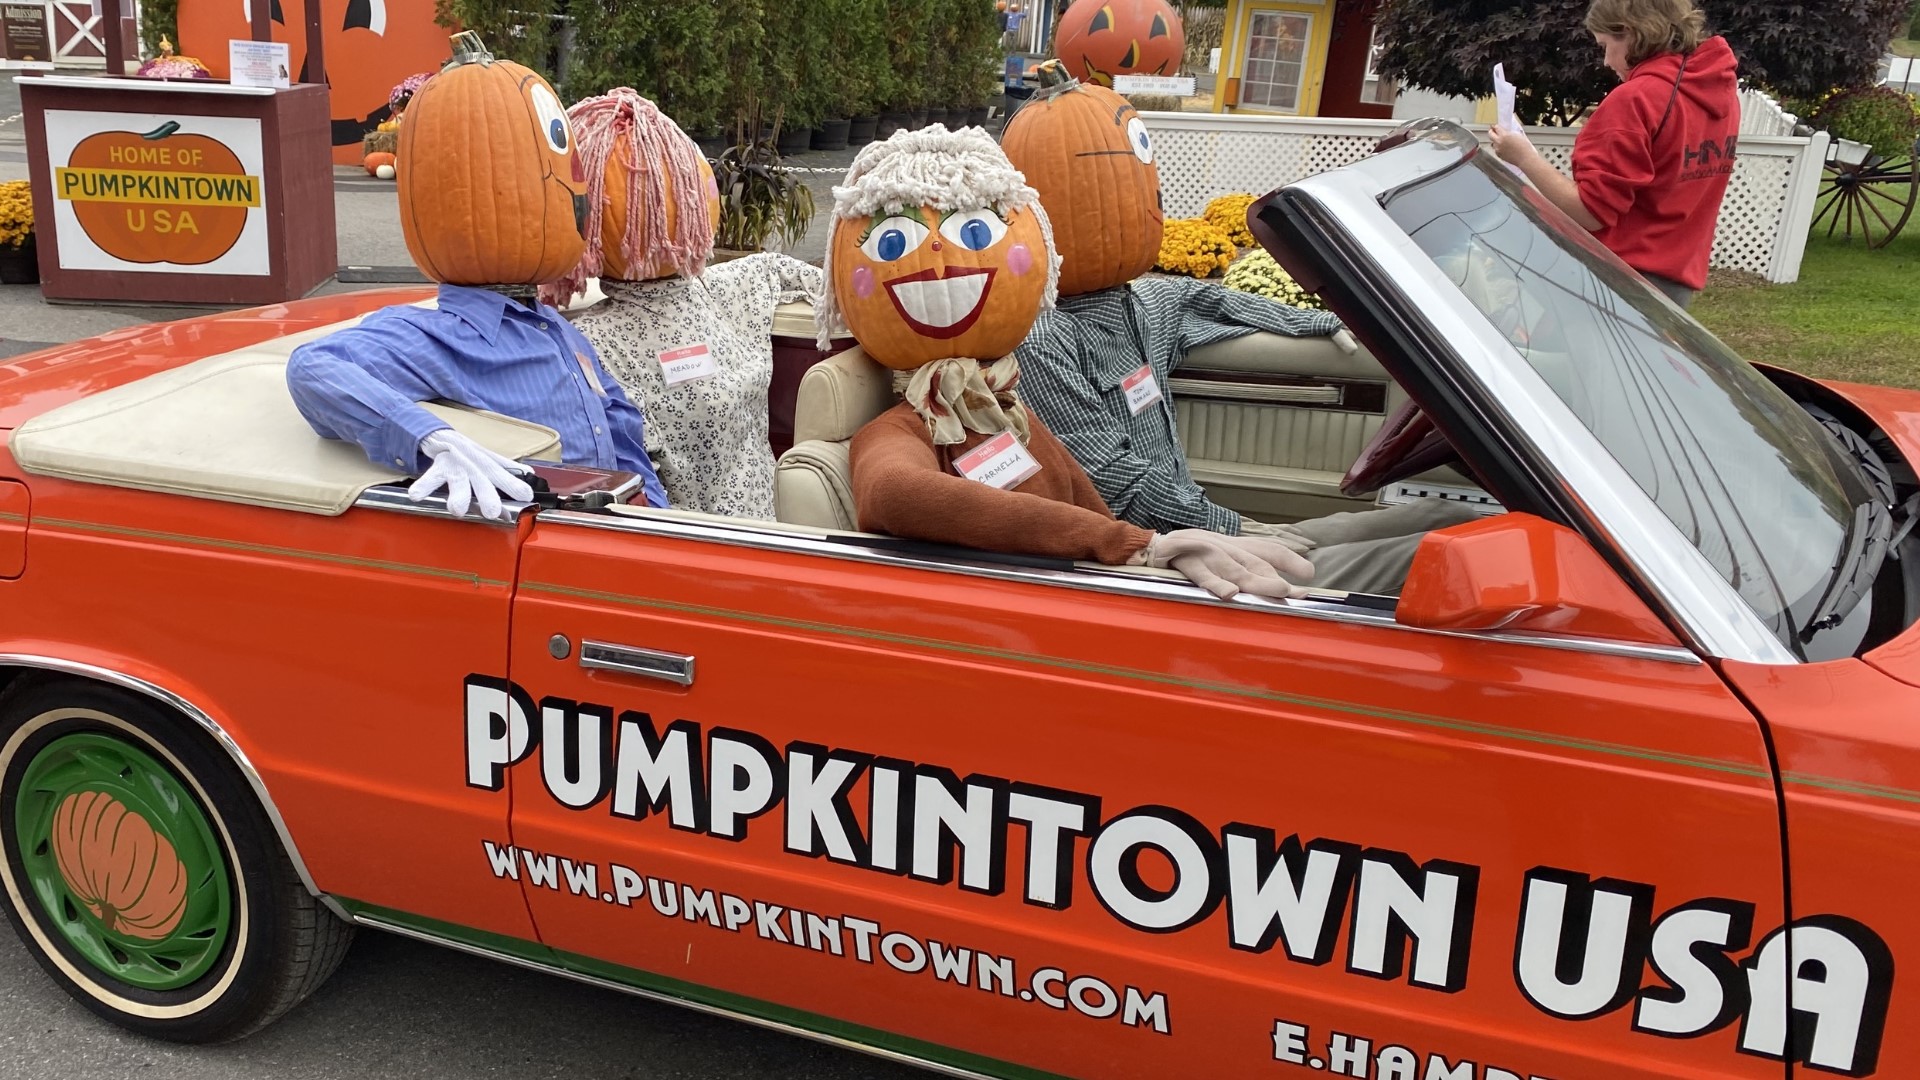 The weather so far this season has proved formidable, but visitors are still seeking Pumpkintown out, said second-generation owner Dan Peszynski.